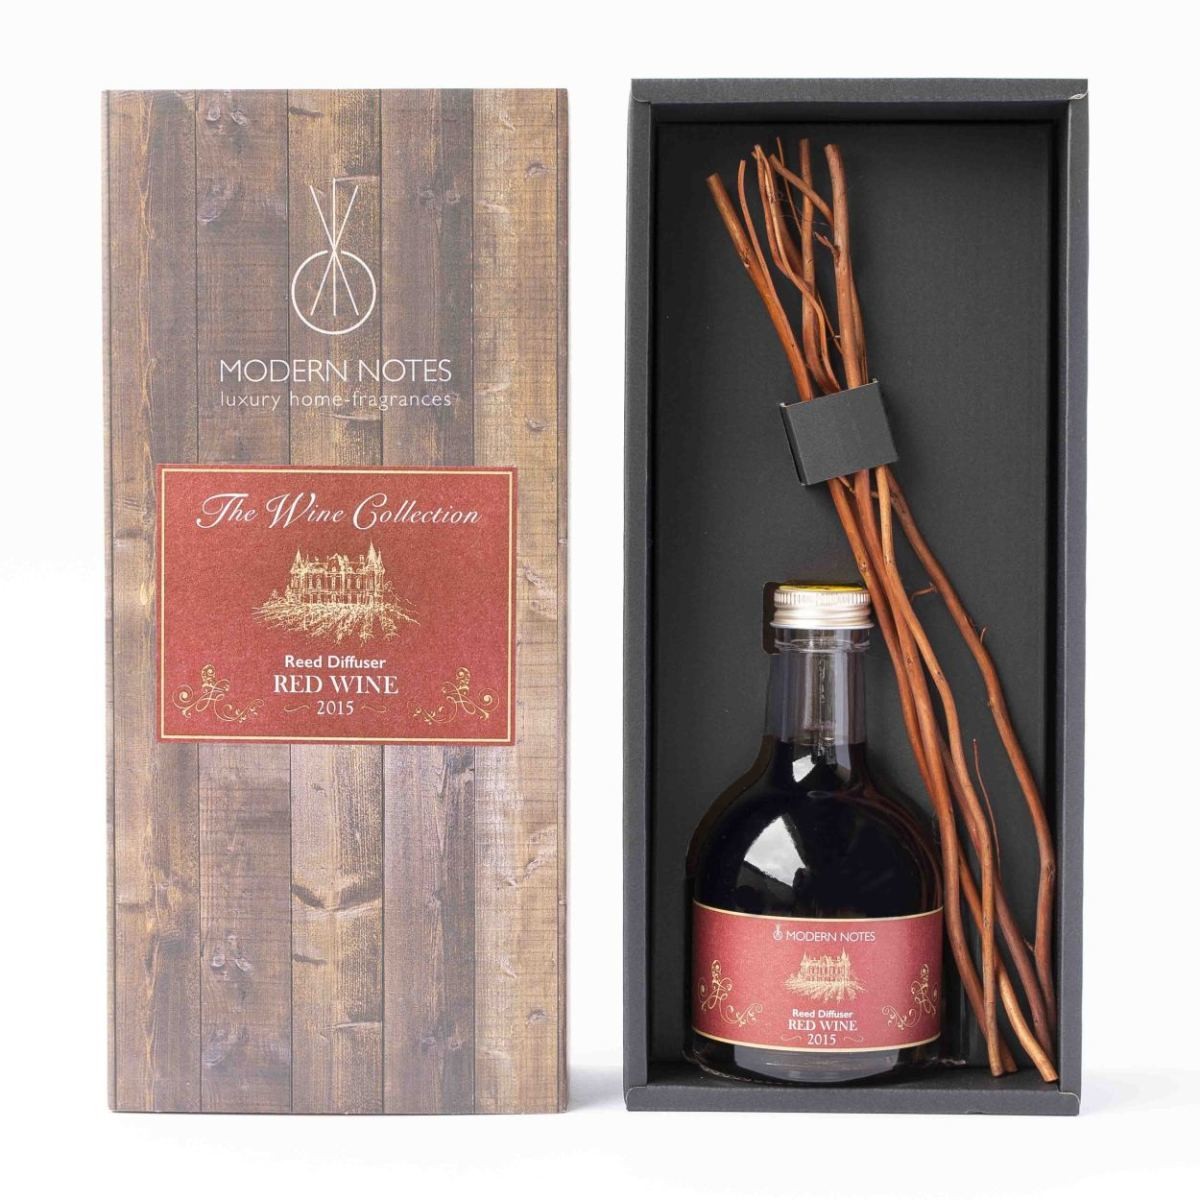 [ official company store ]MODERN NOTES wine collection Lead diffuser (200mL)